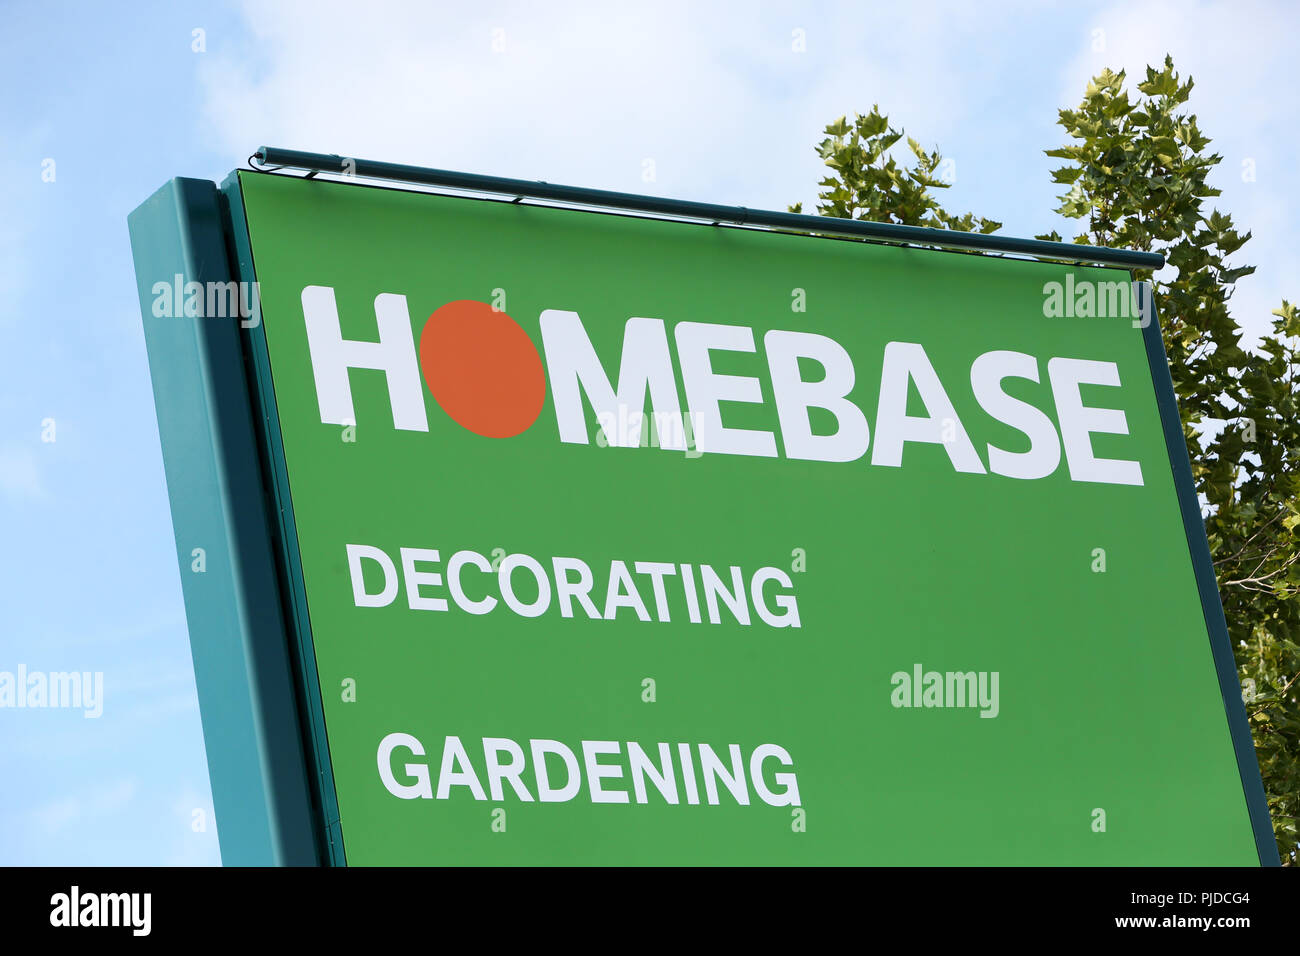 Homebase DIY Store in Chichester, West Sussex, UK. This site was a Homebase, then a Bunnings, now it's a Homebase again. Stock Photo